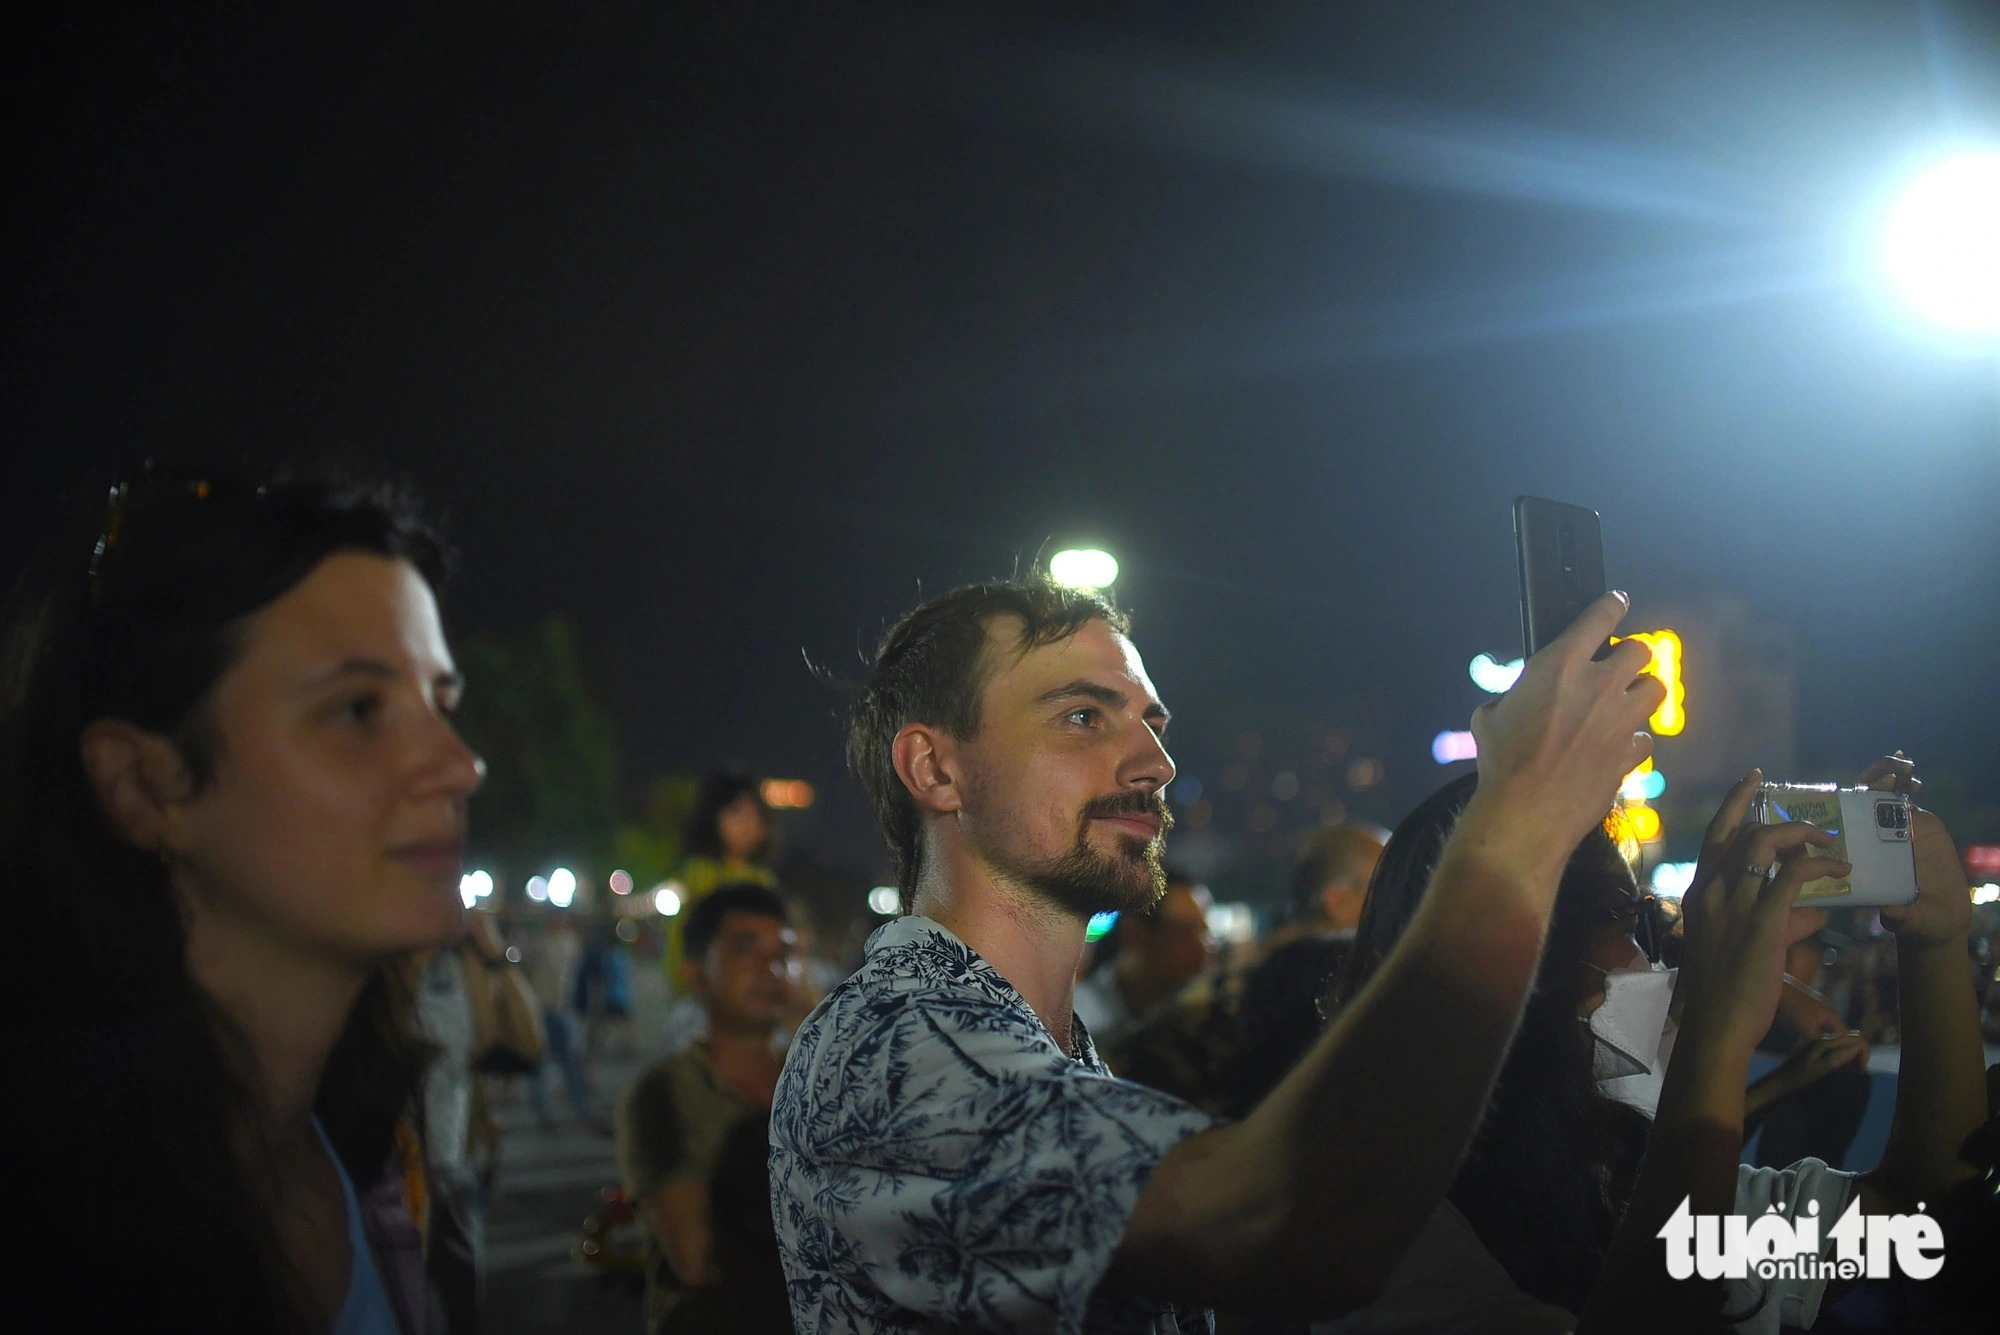 An international carnival-goer captures his favorite moments at the event. Photo: Lam Thien / Tuoi Tre